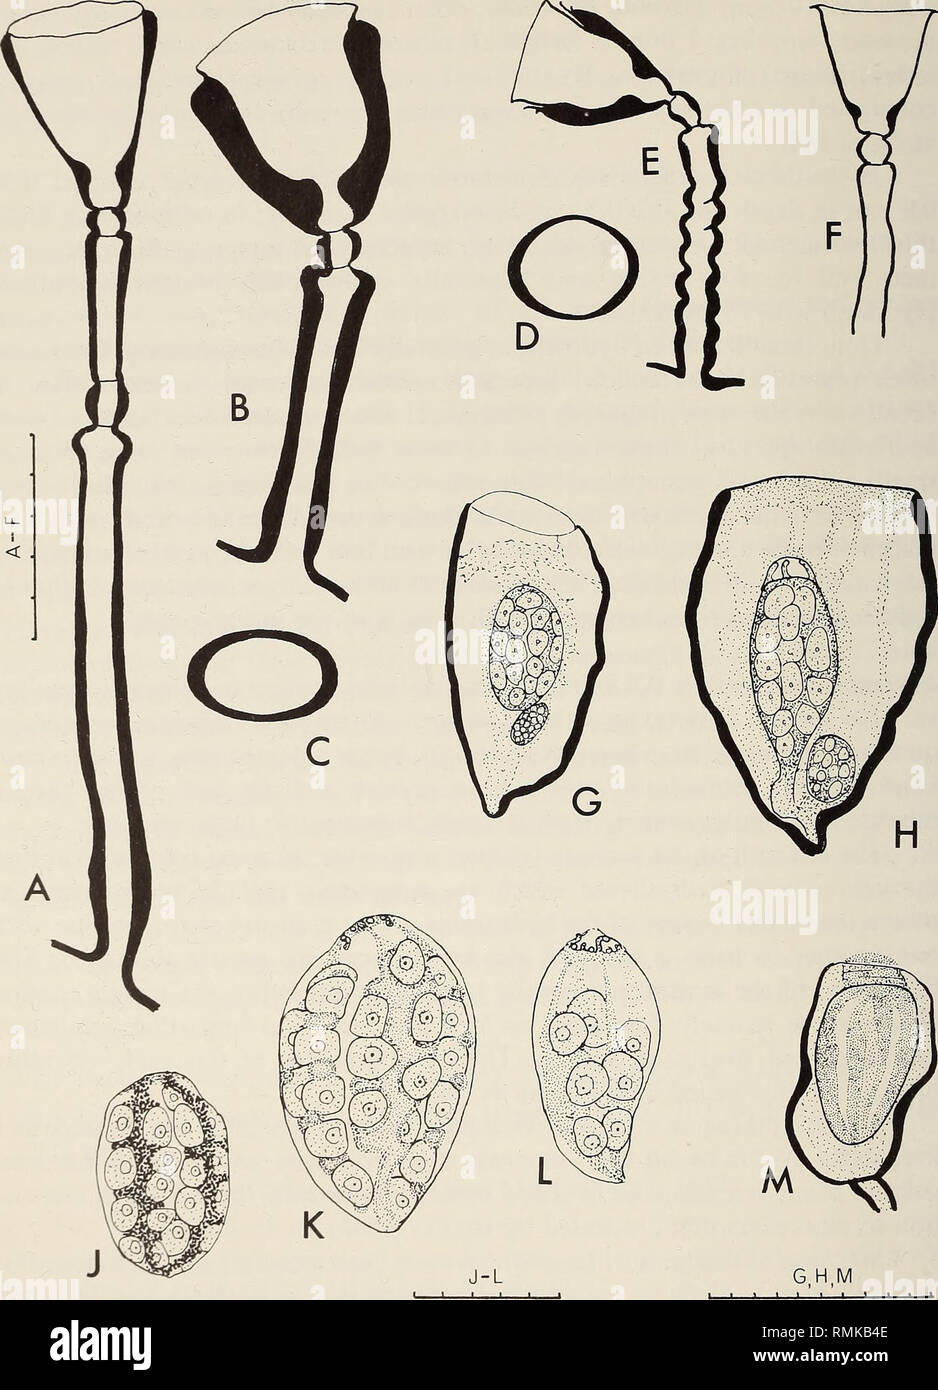 . Annals of the South African Museum = Annale van die Suid-Afrikaanse Museum. Natural history. 210 ANNALS OF THE SOUTH AFRICAN MUSEUM. Fig. 69. Campanularia integra. A-C, hydrothecae with smooth stems, in narrow view, broad view and t.s. respectively; D and E, hydrotheca with annulated stem in t.s. and broad view respec- tively; F, hydrotheca with thin perisarc; G, female gonophore with round section; H, female gonophore with flat section; J-L, female gonophores dissected from gonothecae, J immature with radial canals containing pigment, K mature, L partly spent and showing medusoid structures Stock Photo